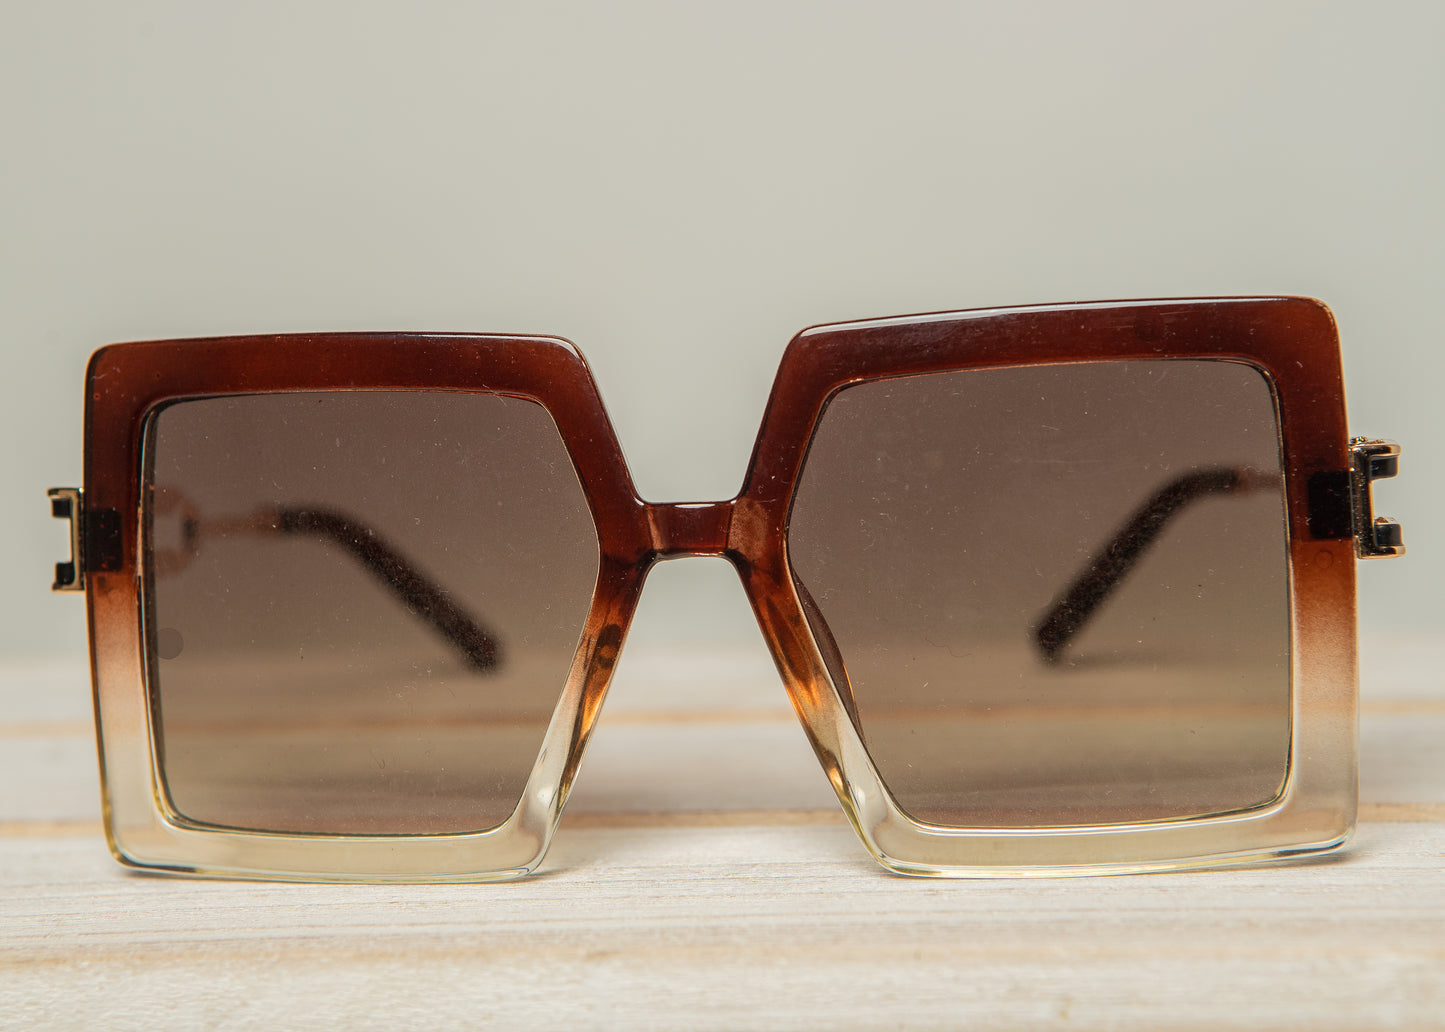 "Unbothered" Oversize Square Shades